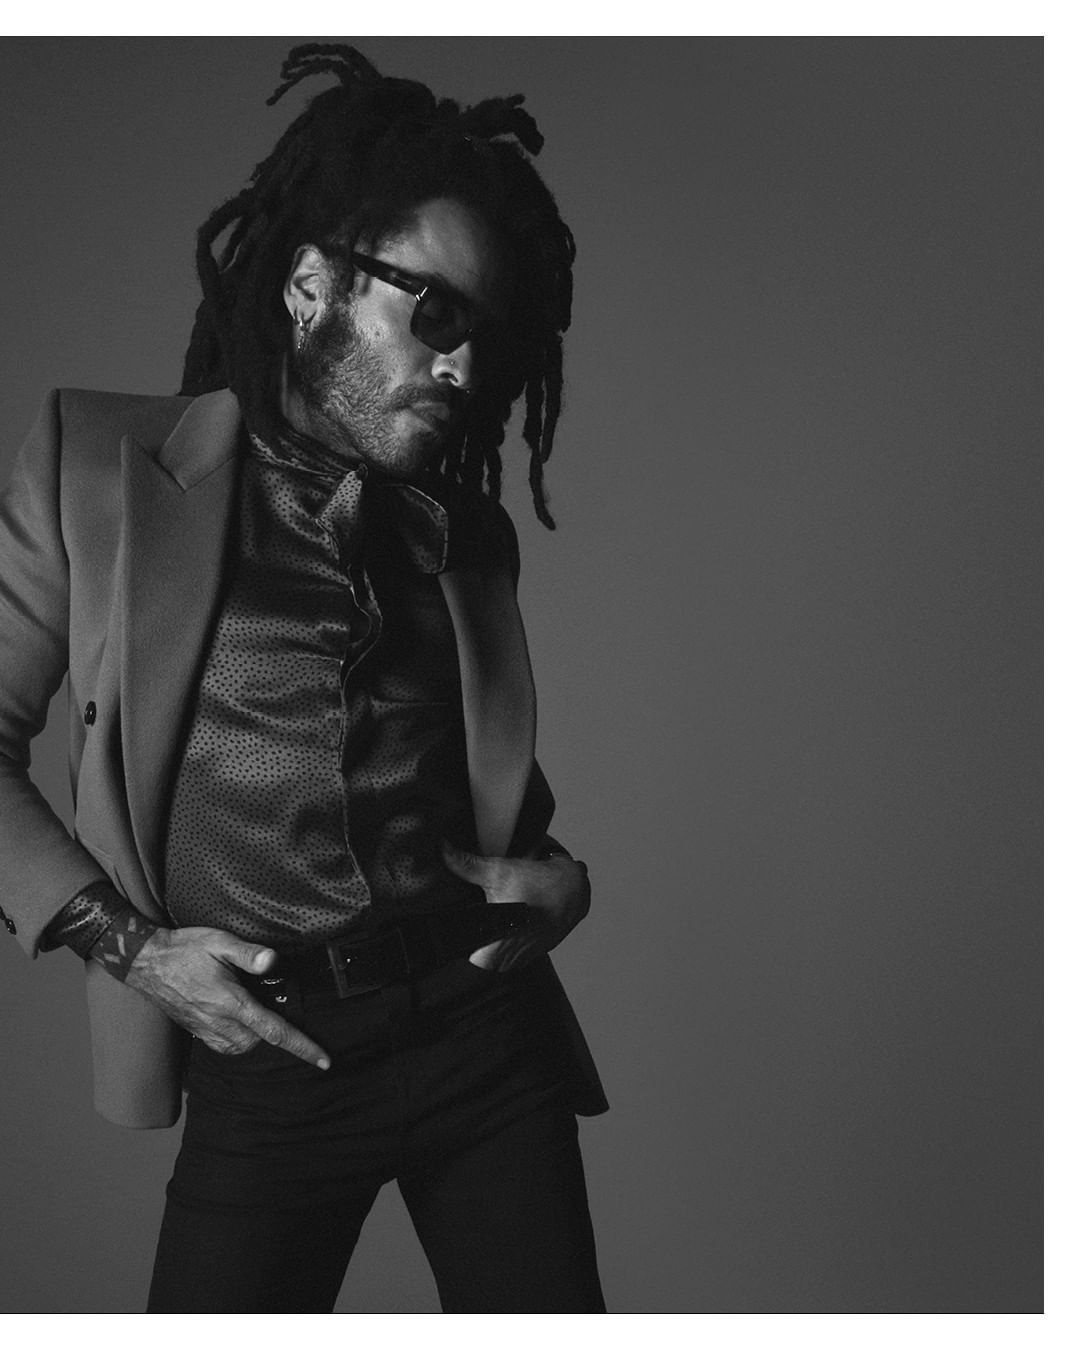 Lenny Kravitz for YSL Fall Winter 20 photographed by David Sims